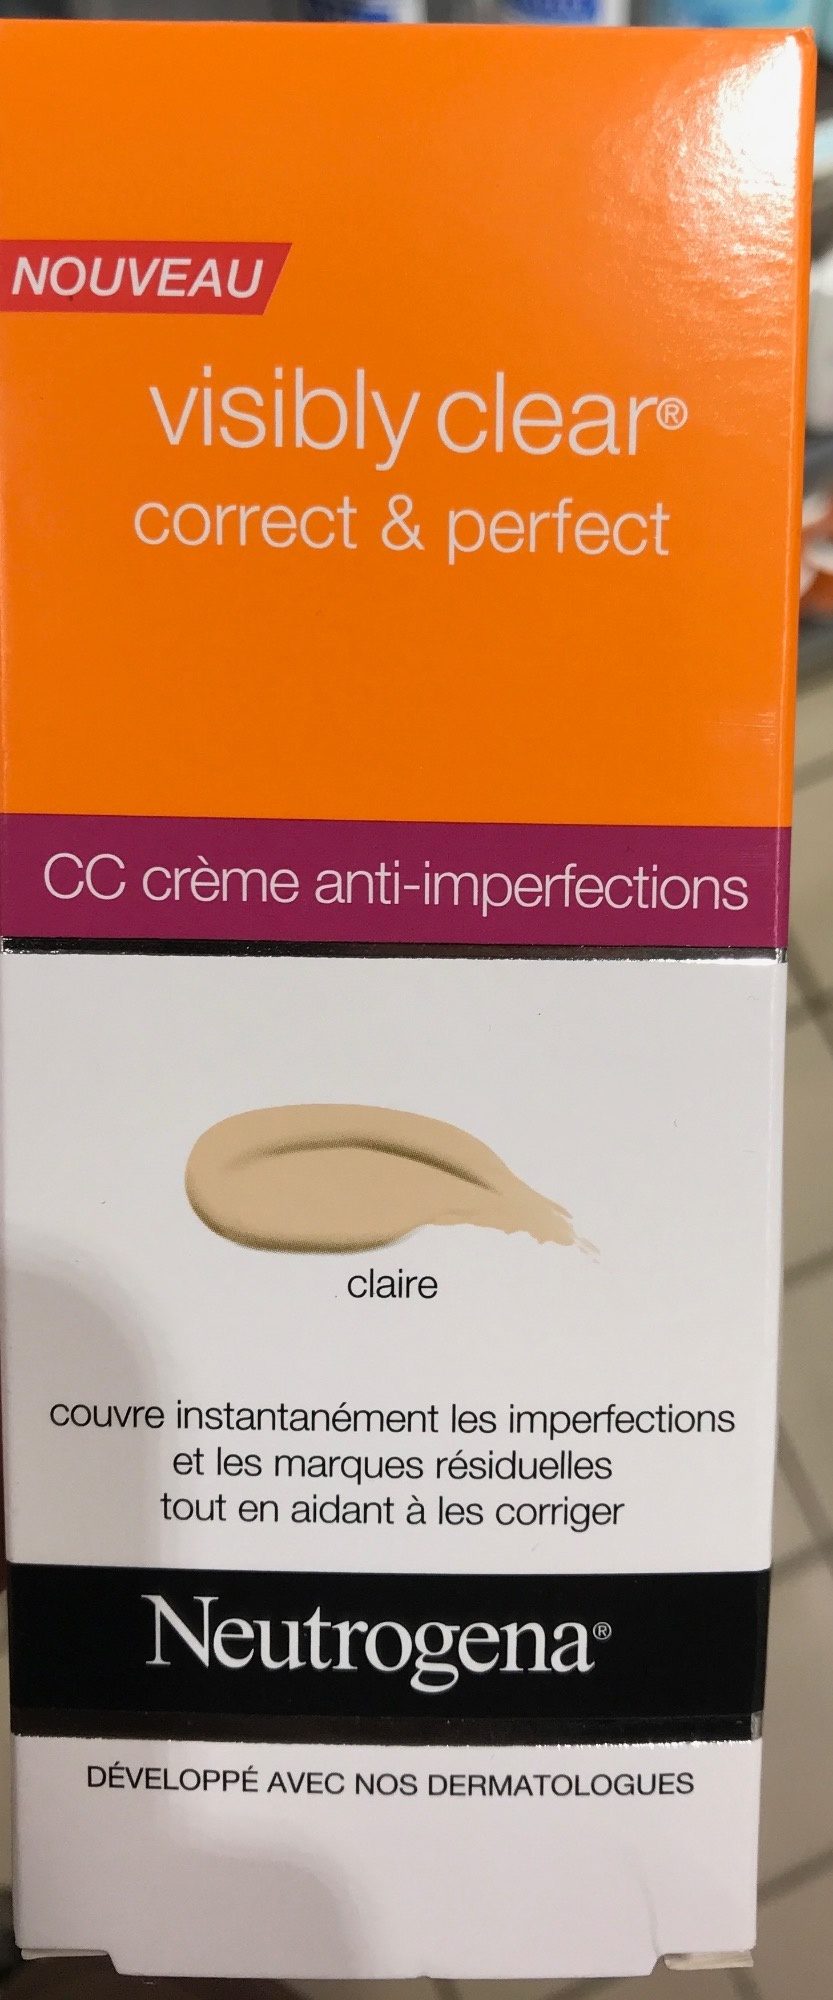 Visibly Clear Correct & Perfect CC Crème Claire - Product - fr